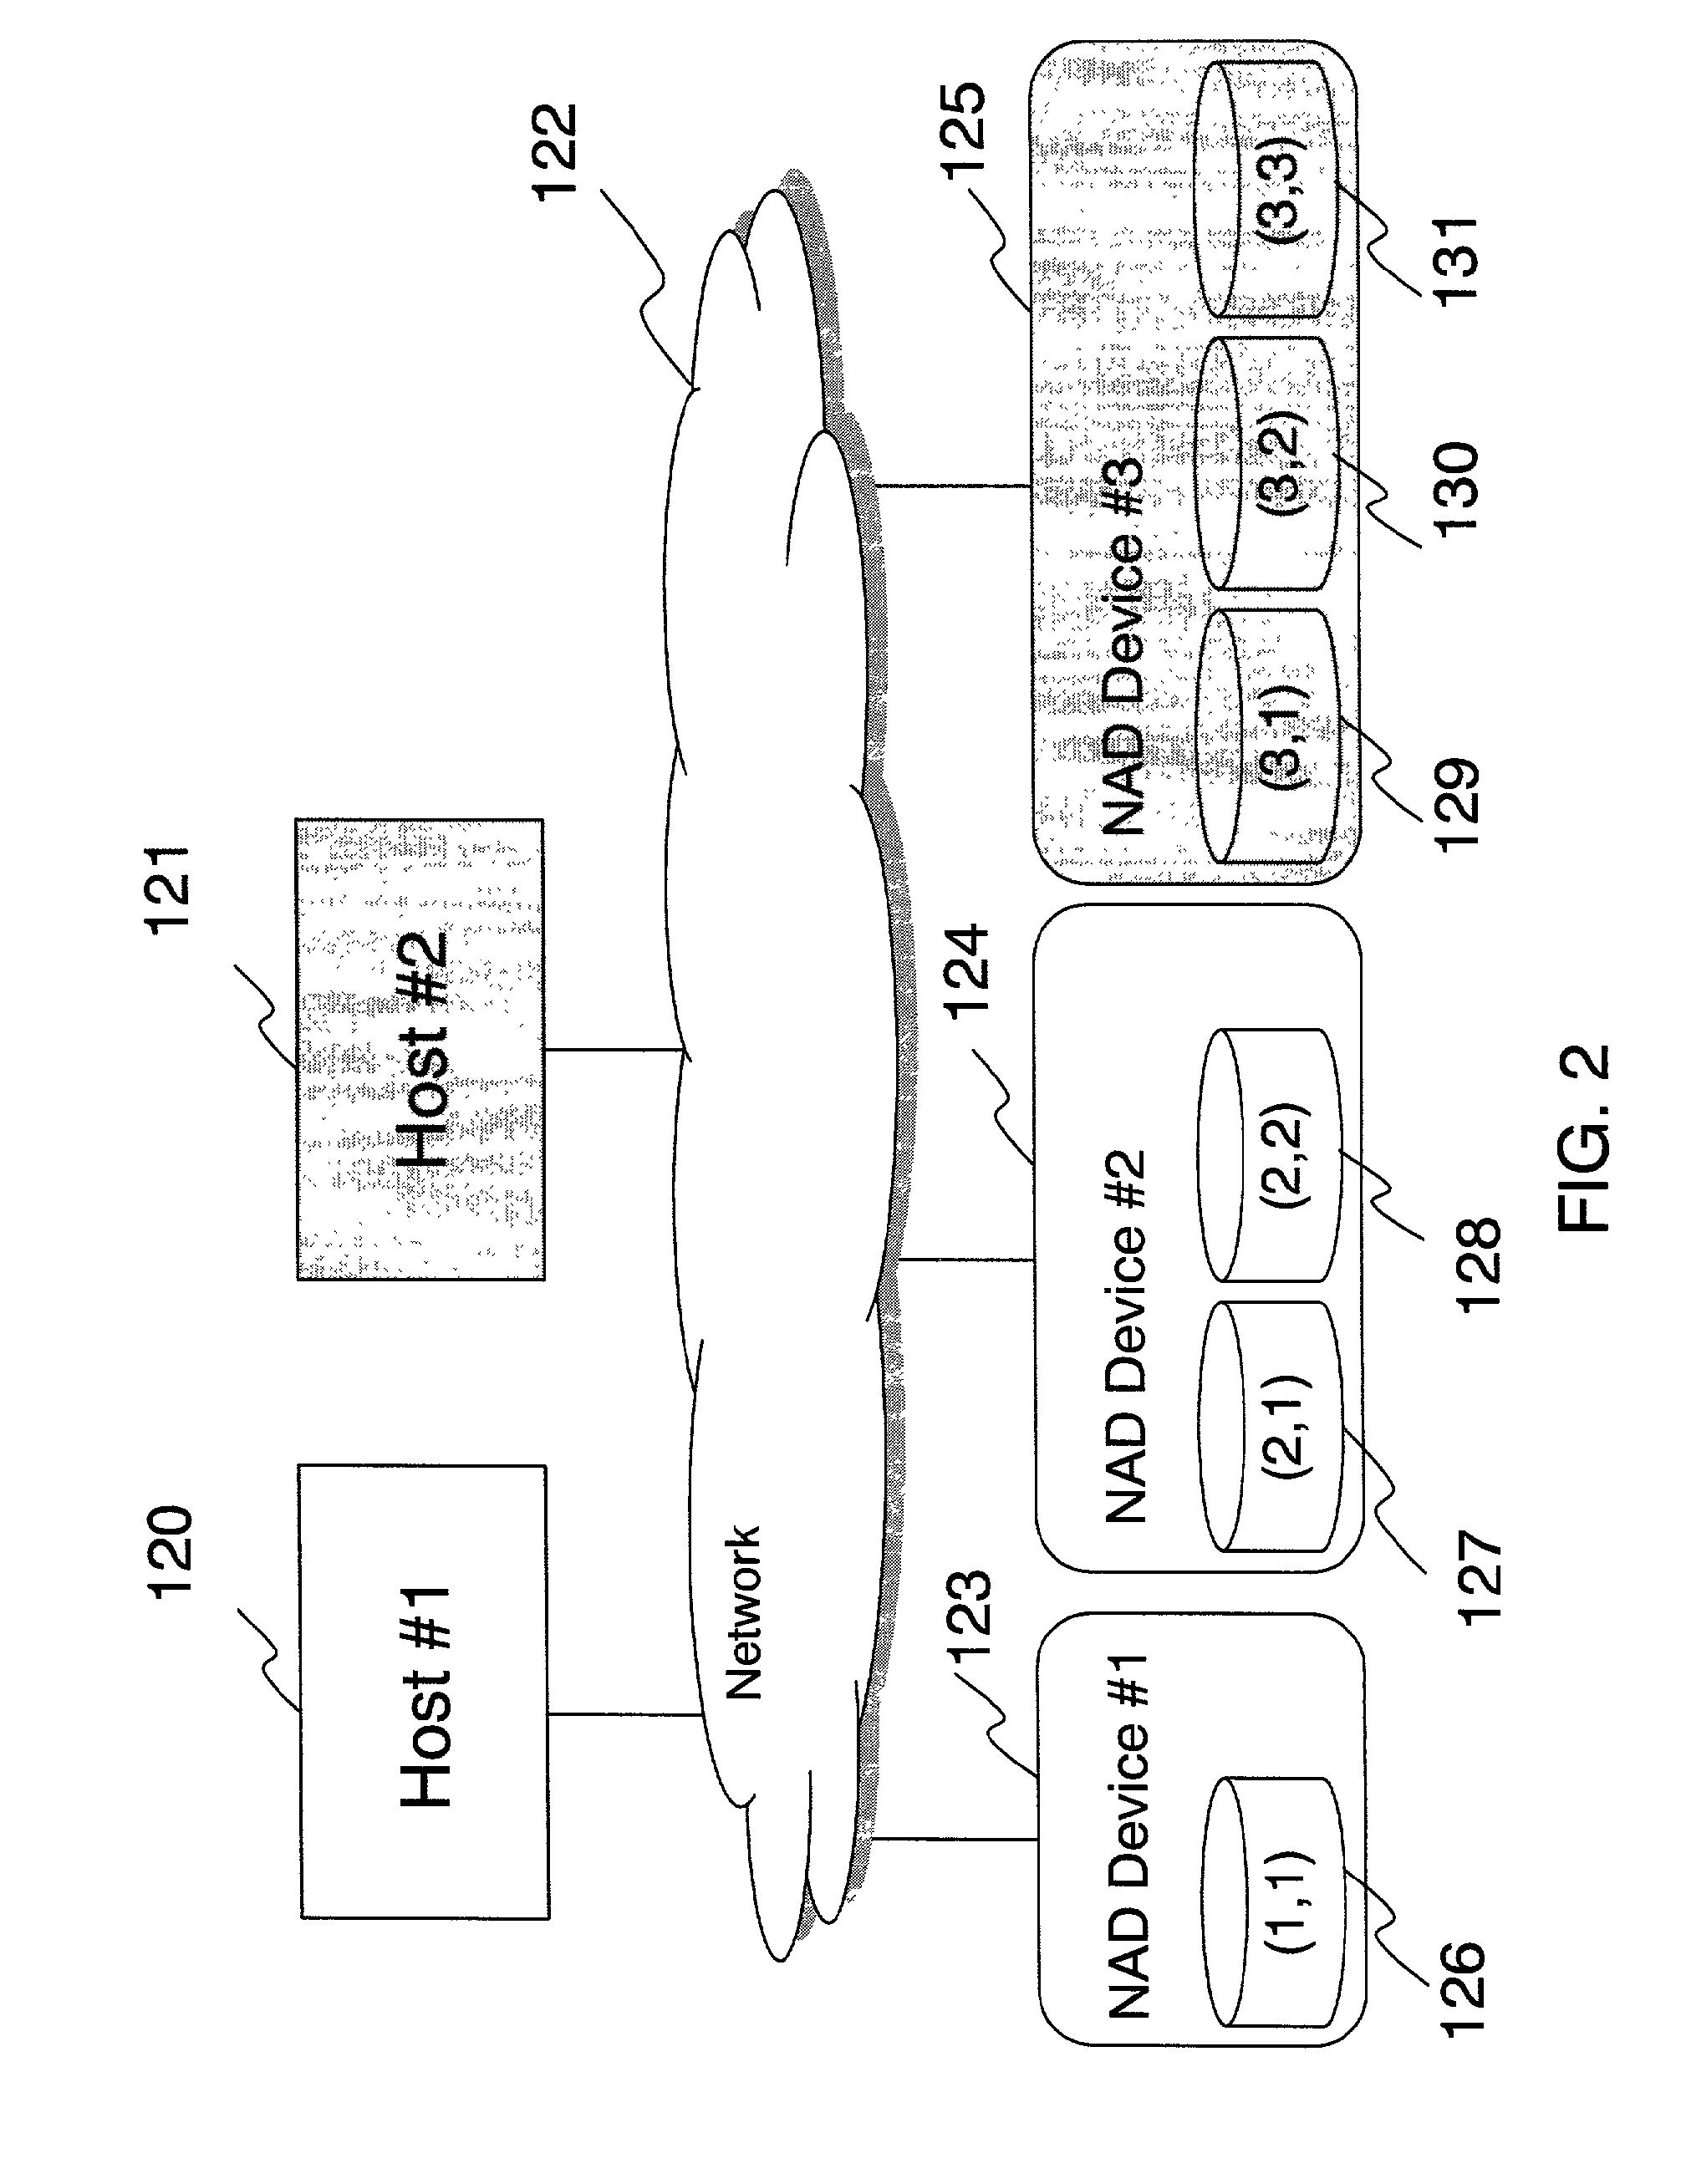 Disk system adapted to be directly attached to network